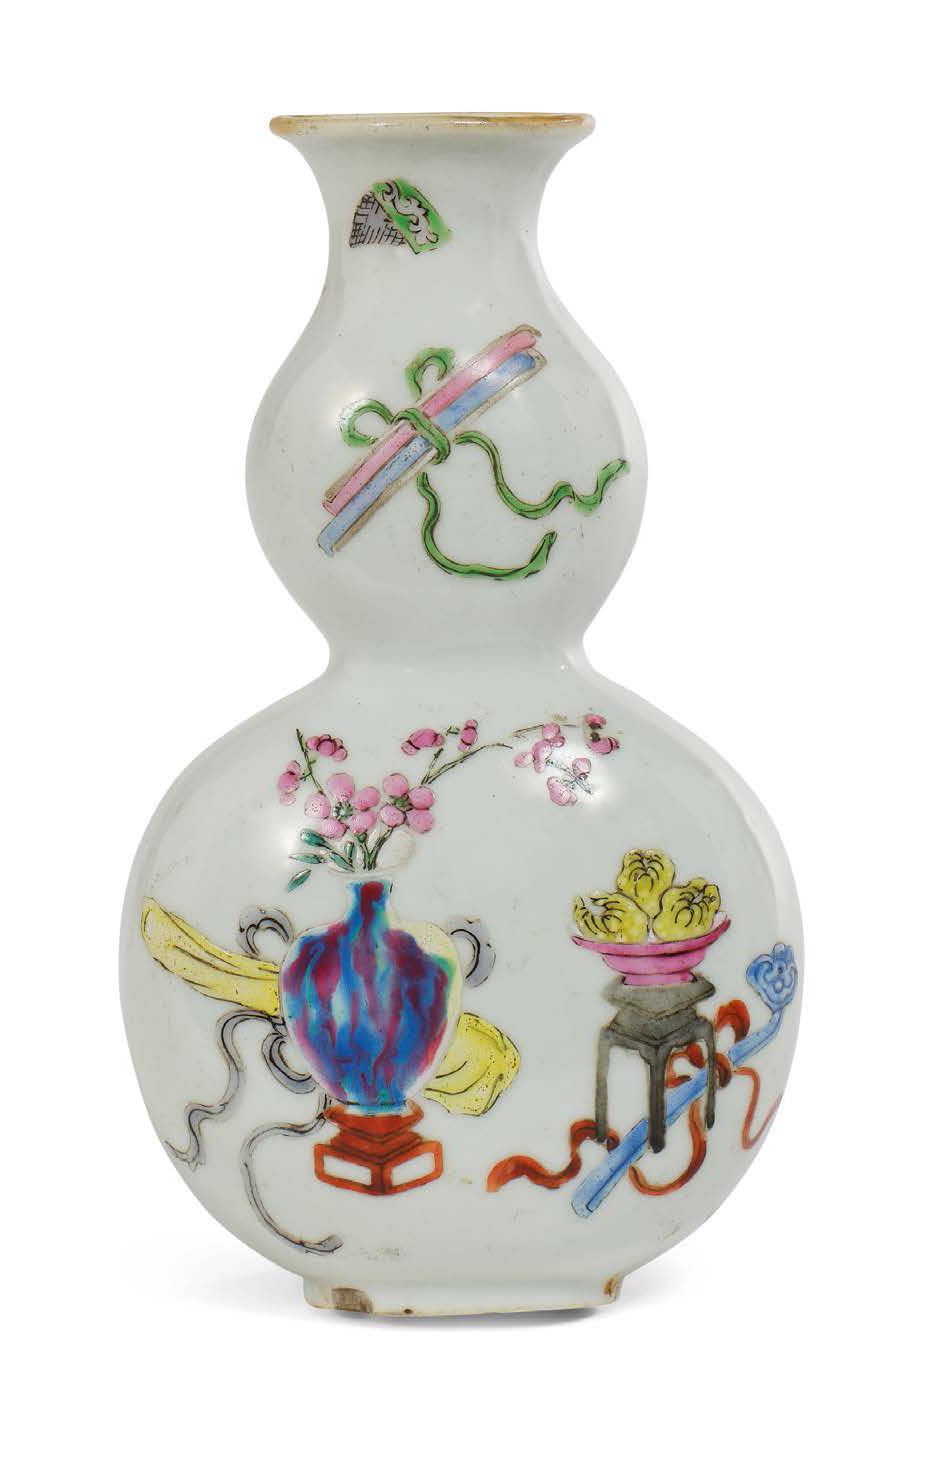 CHINE DYNASTIE QING, XIXe SIÈCLE Small porcelain bracket vase, resuming the shap&hellip;